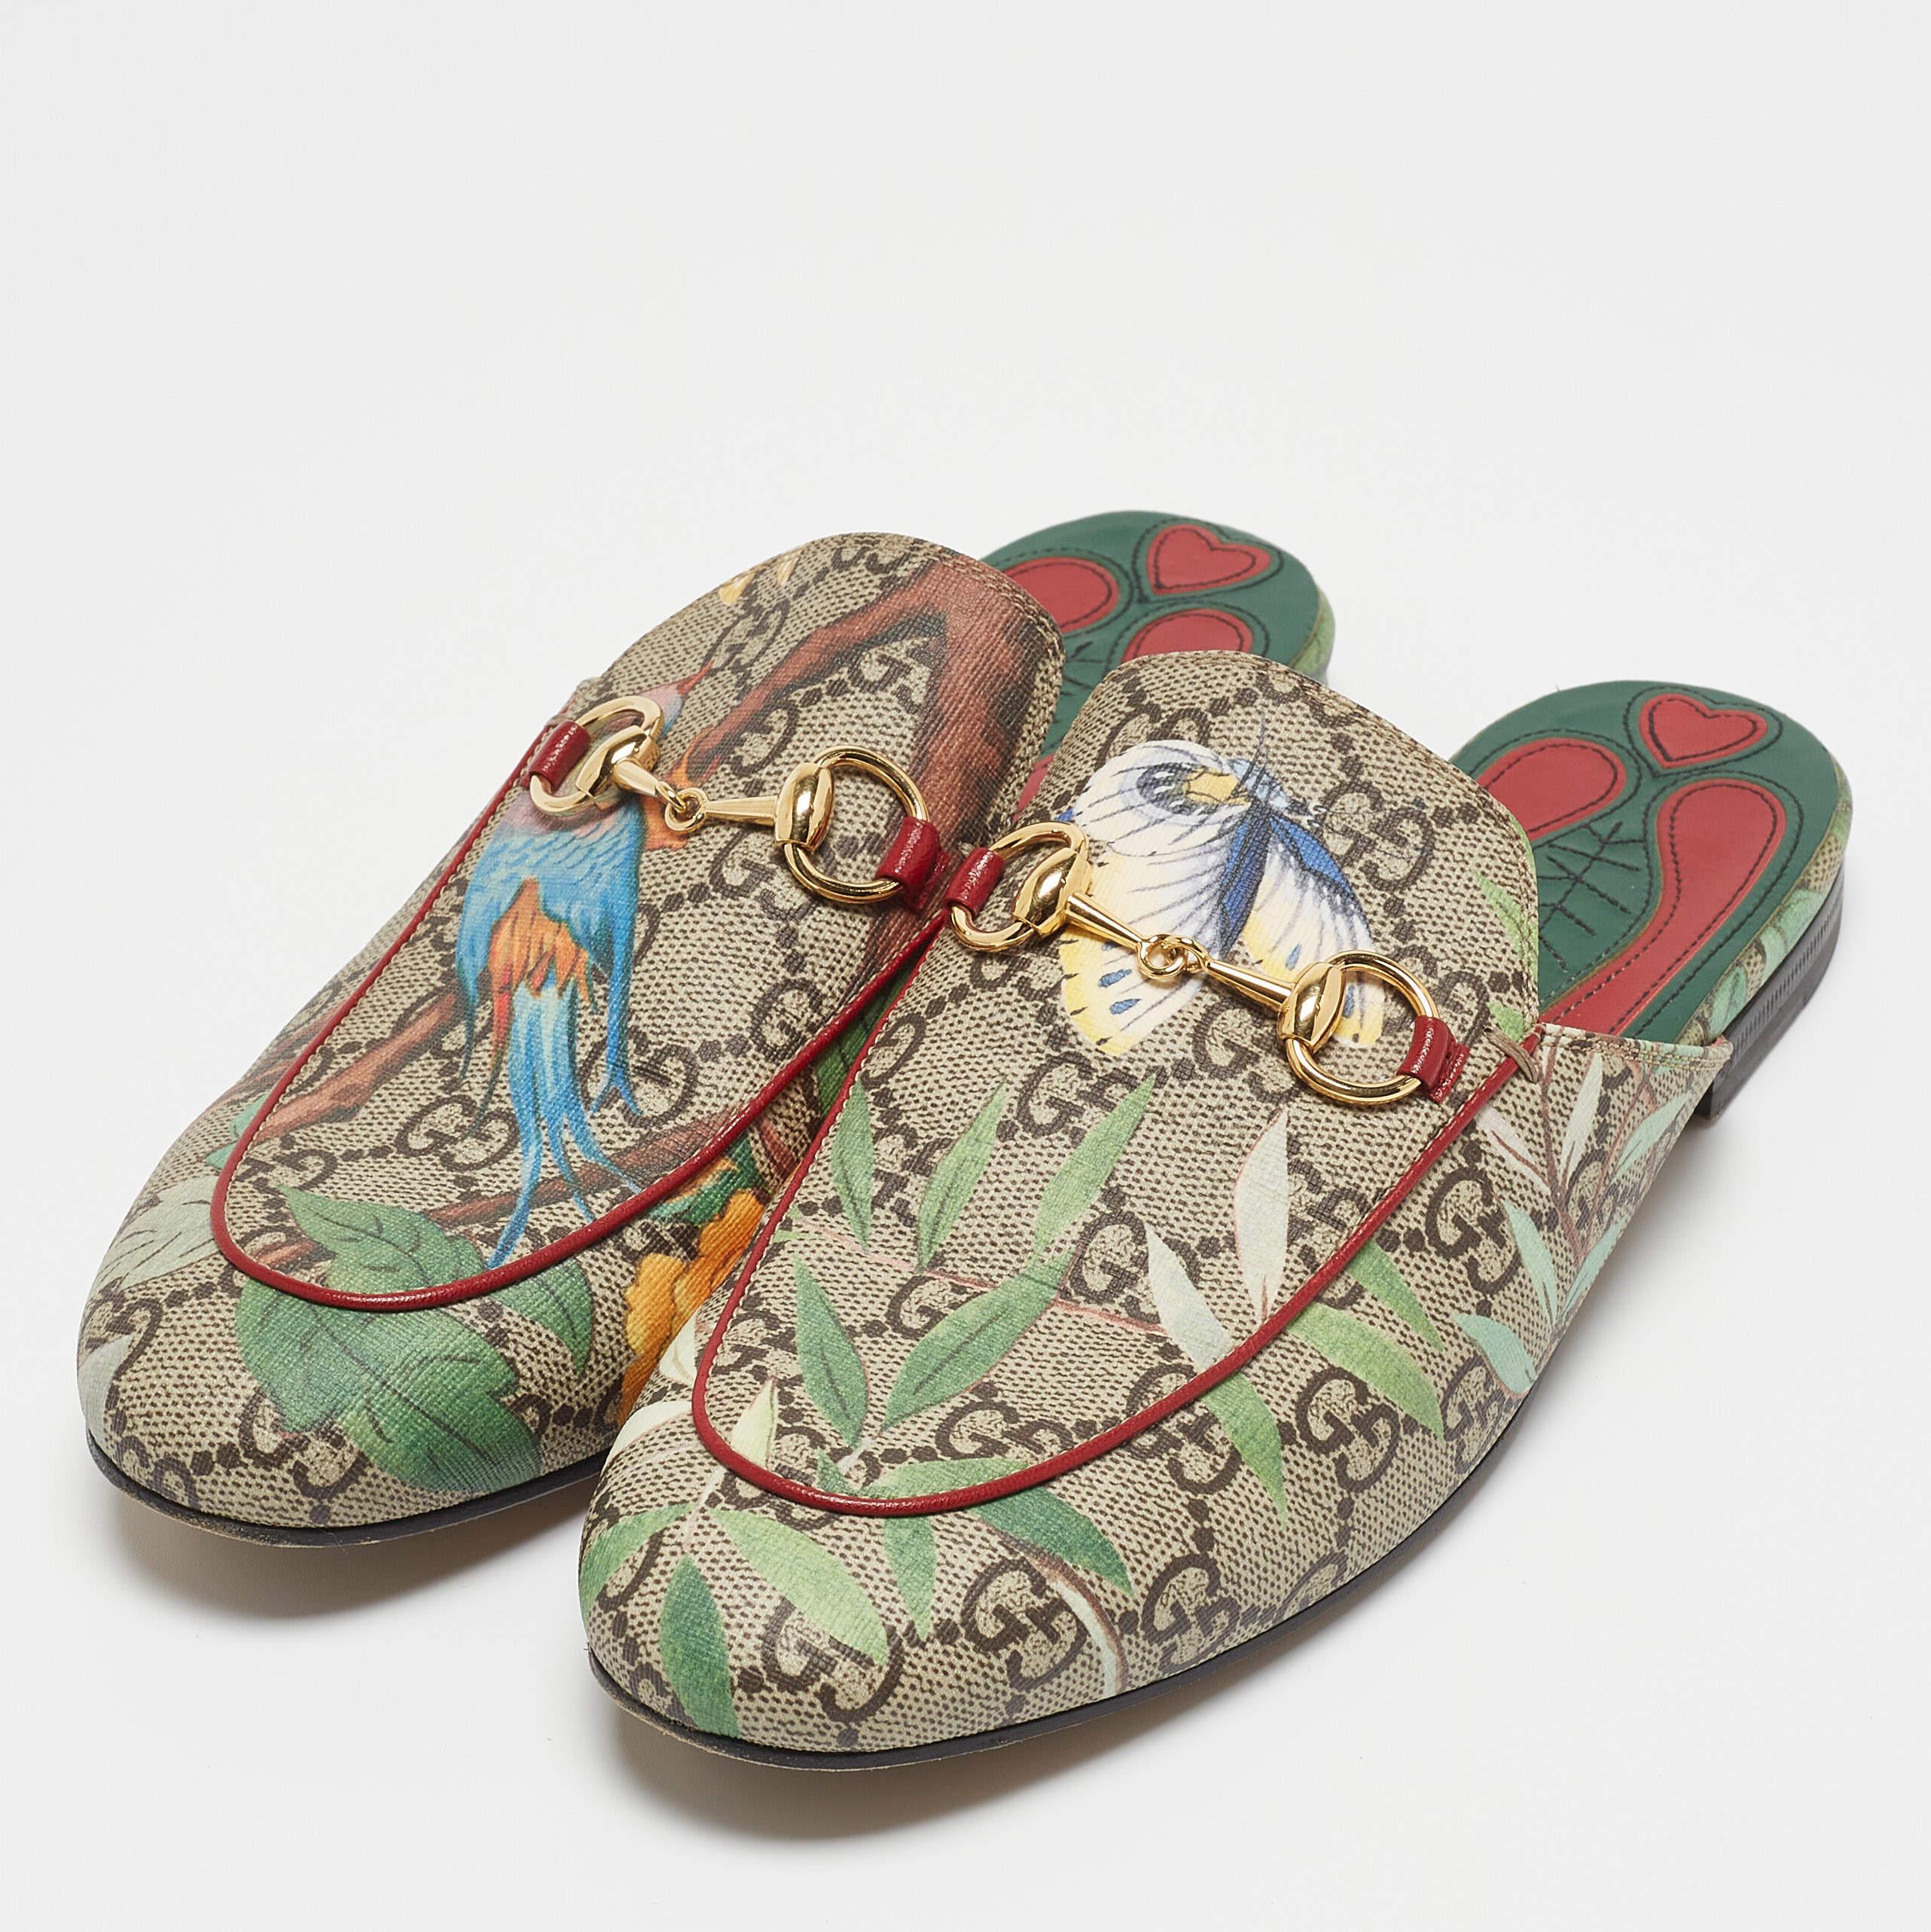 These Gucci Princetown mules signify luxury and practicality. An ultimate favorite of style enthusiasts, its silhouette has the luxe touch of the Horsebit motif on the uppers. It comes made from Tian print GG Supreme canvas.